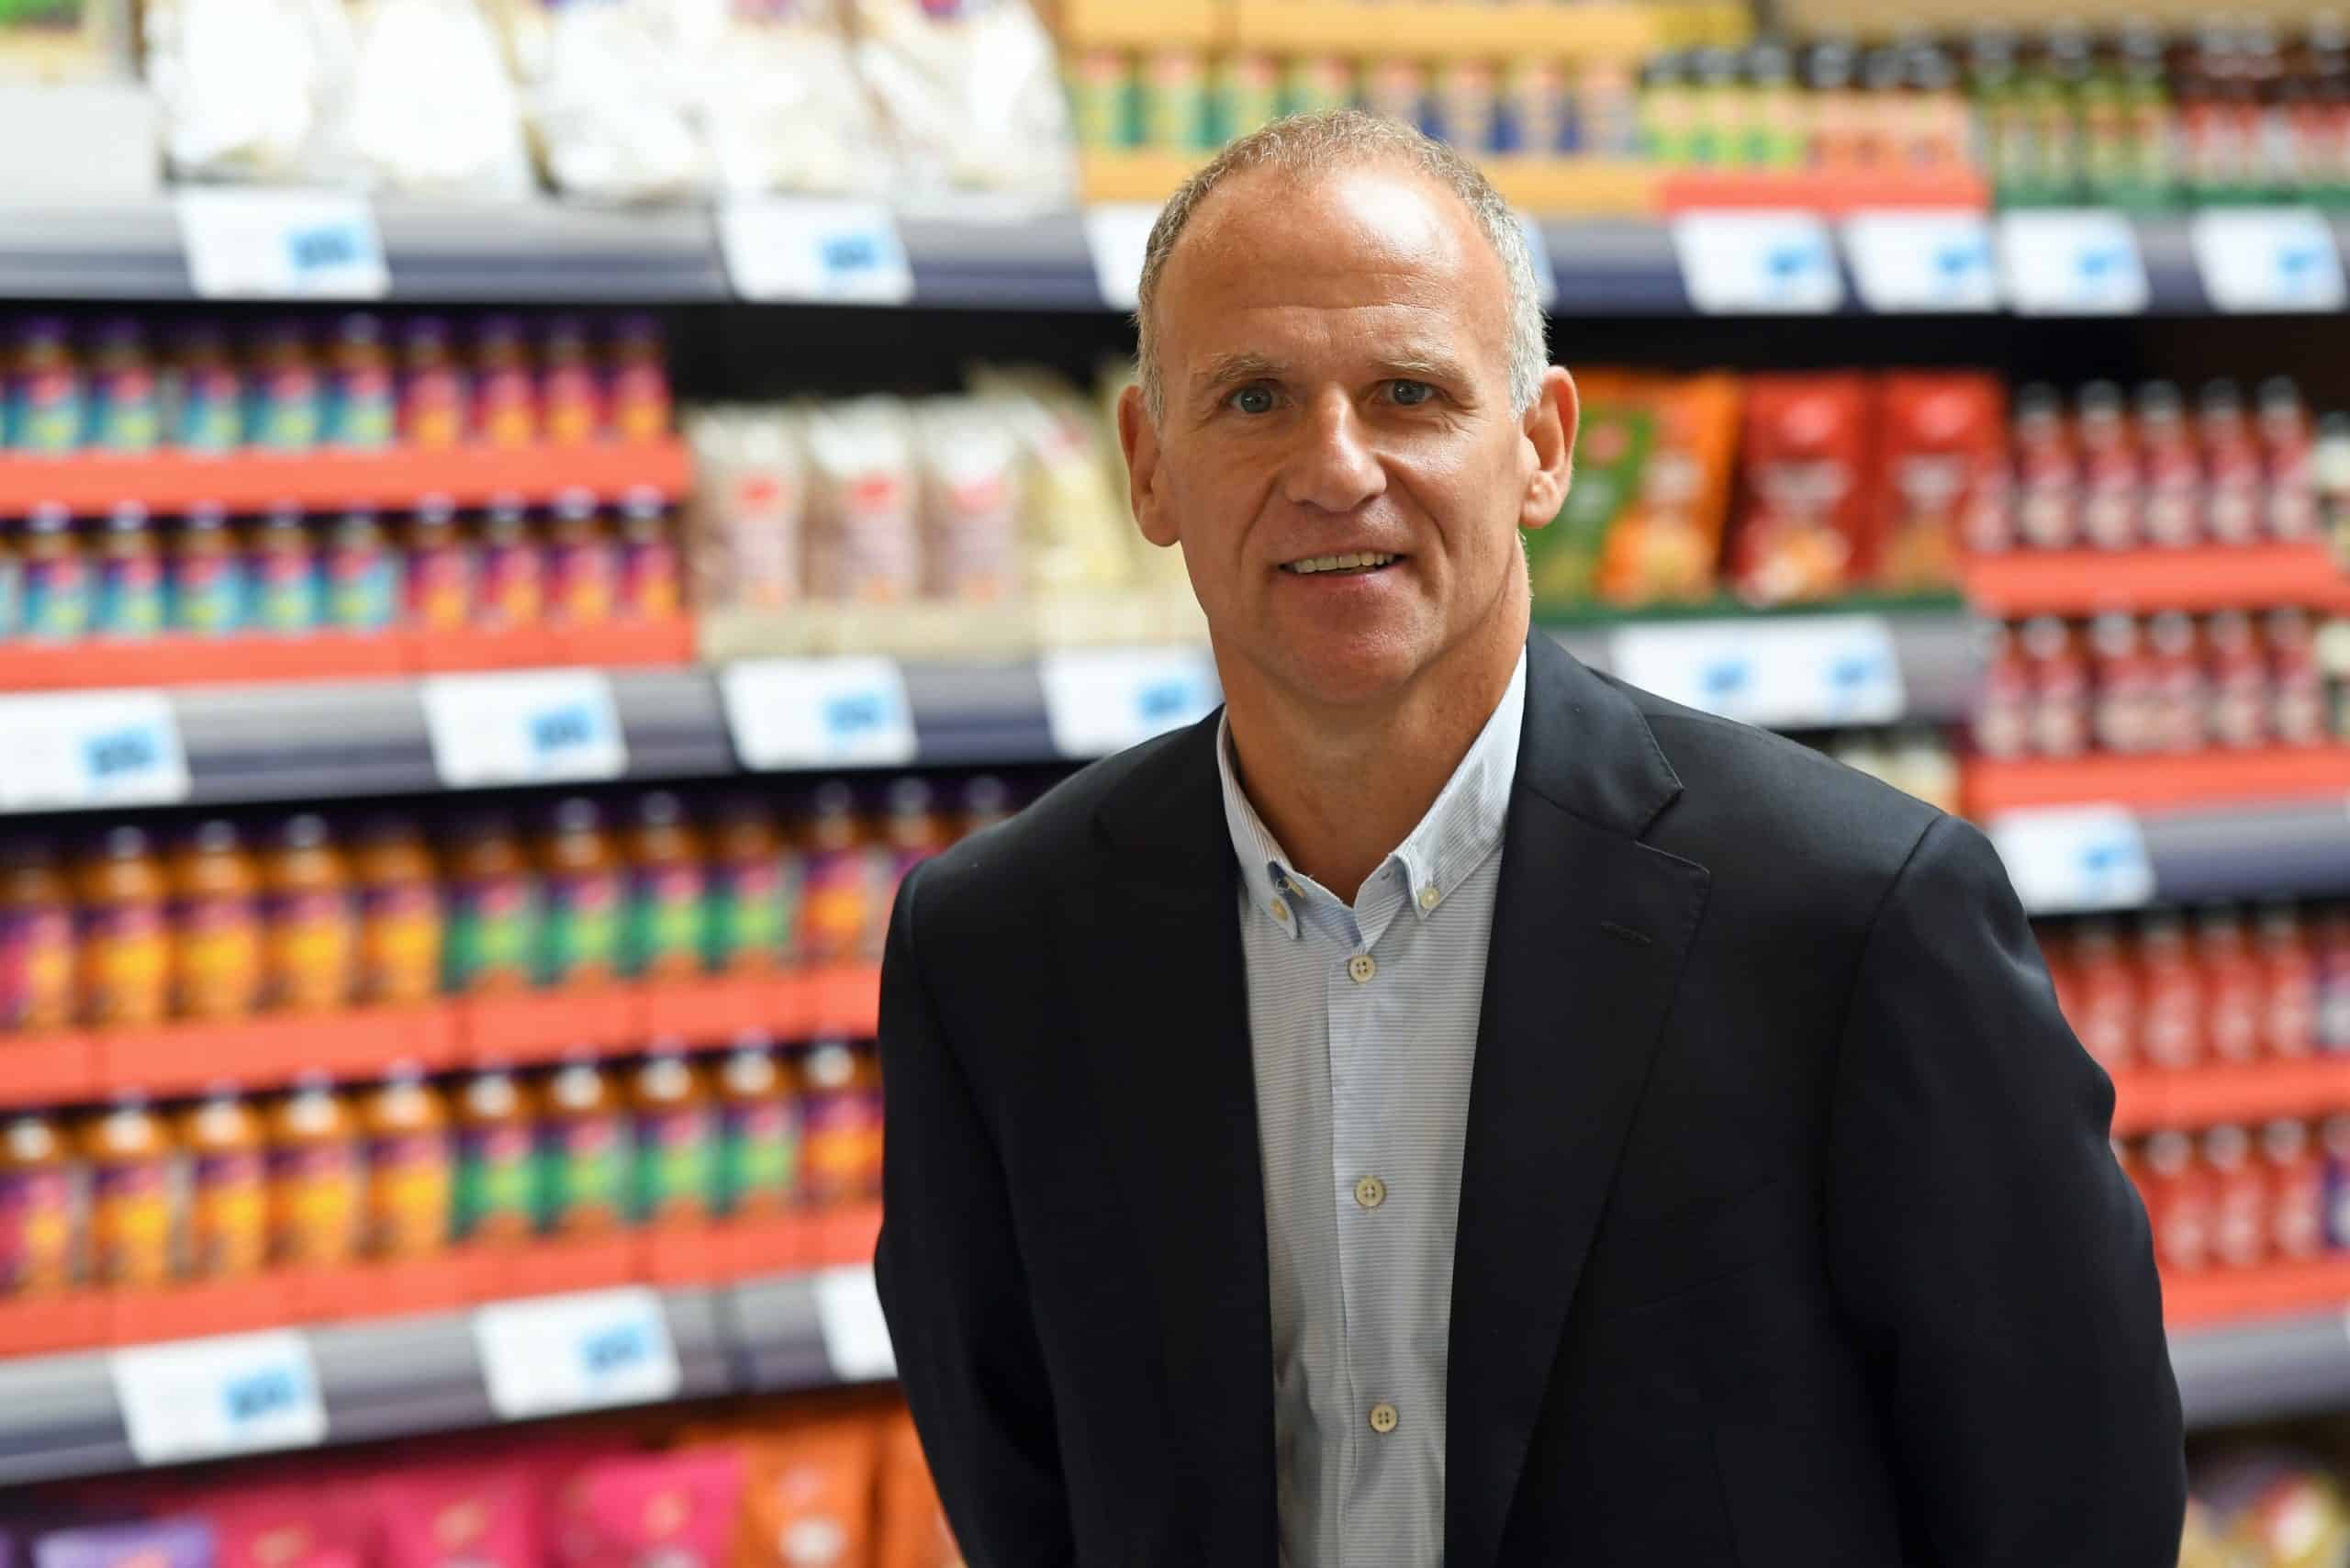 Tesco hands out huge dividends despite receiving a £585 million business rates holiday